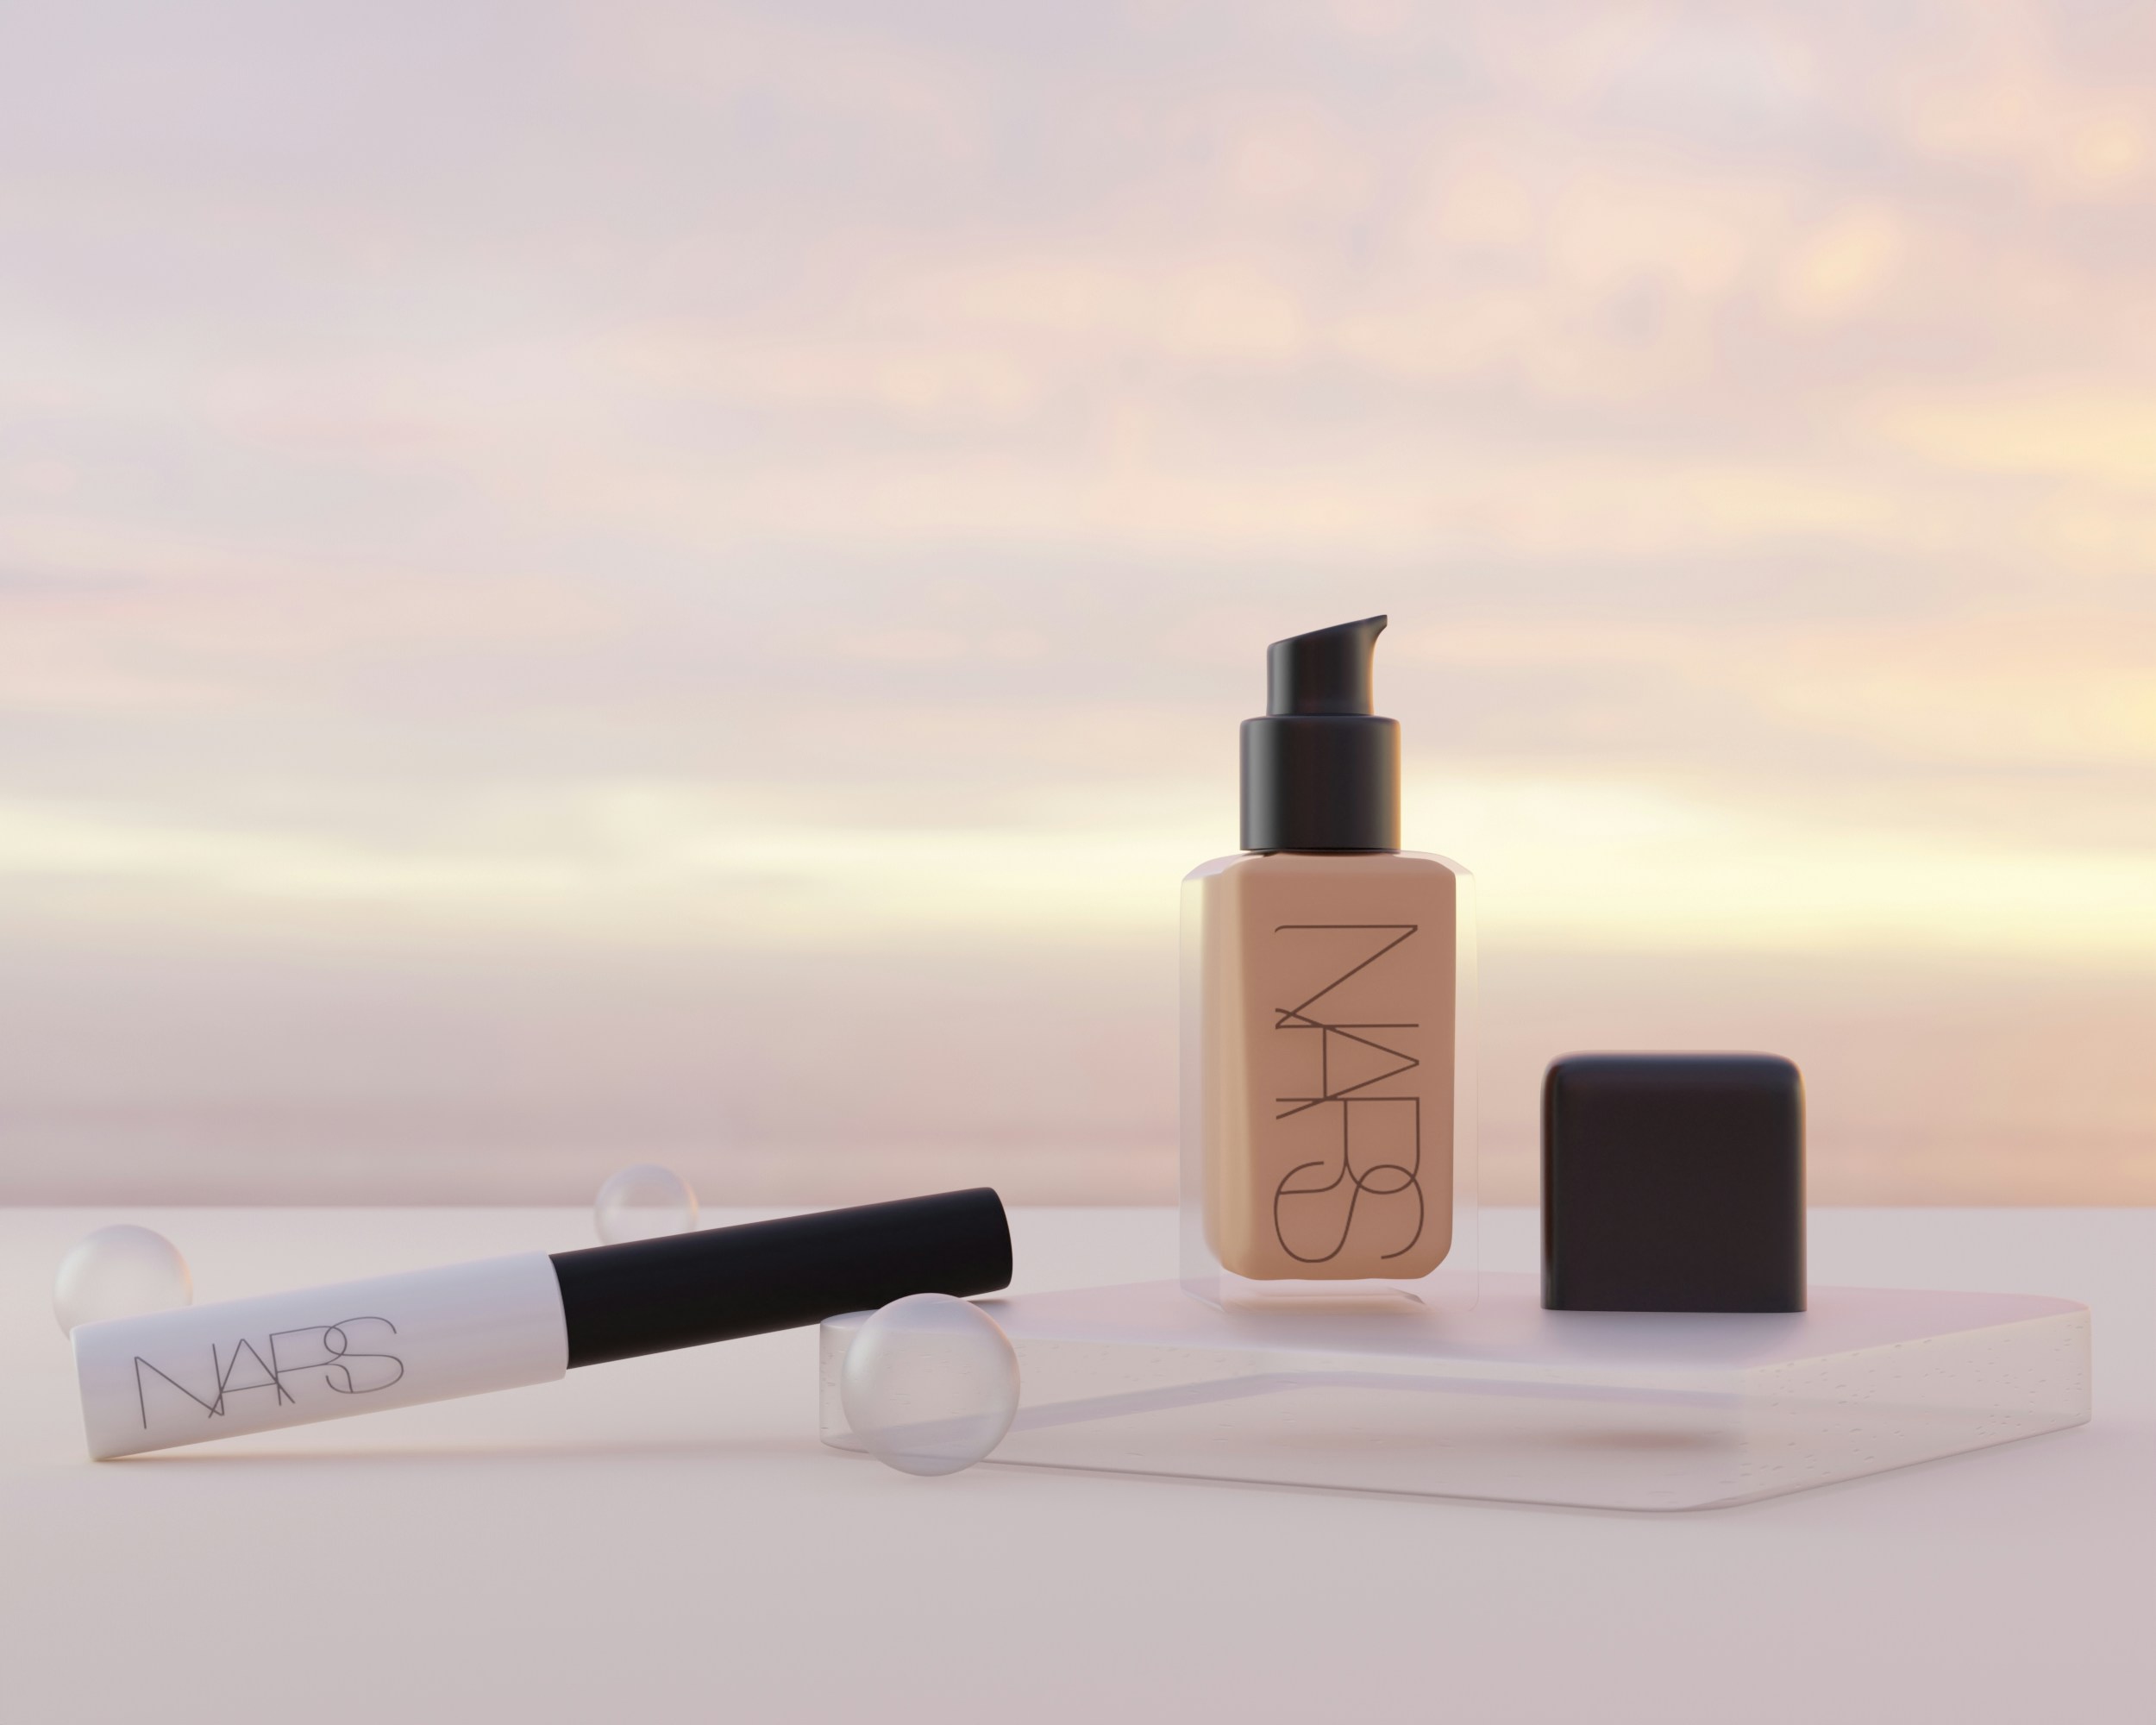 Nars cosmetic products. Created in Blender. Feel free to contact me through email mariia.shalabaieva@gmail.com Check out my previous collections 